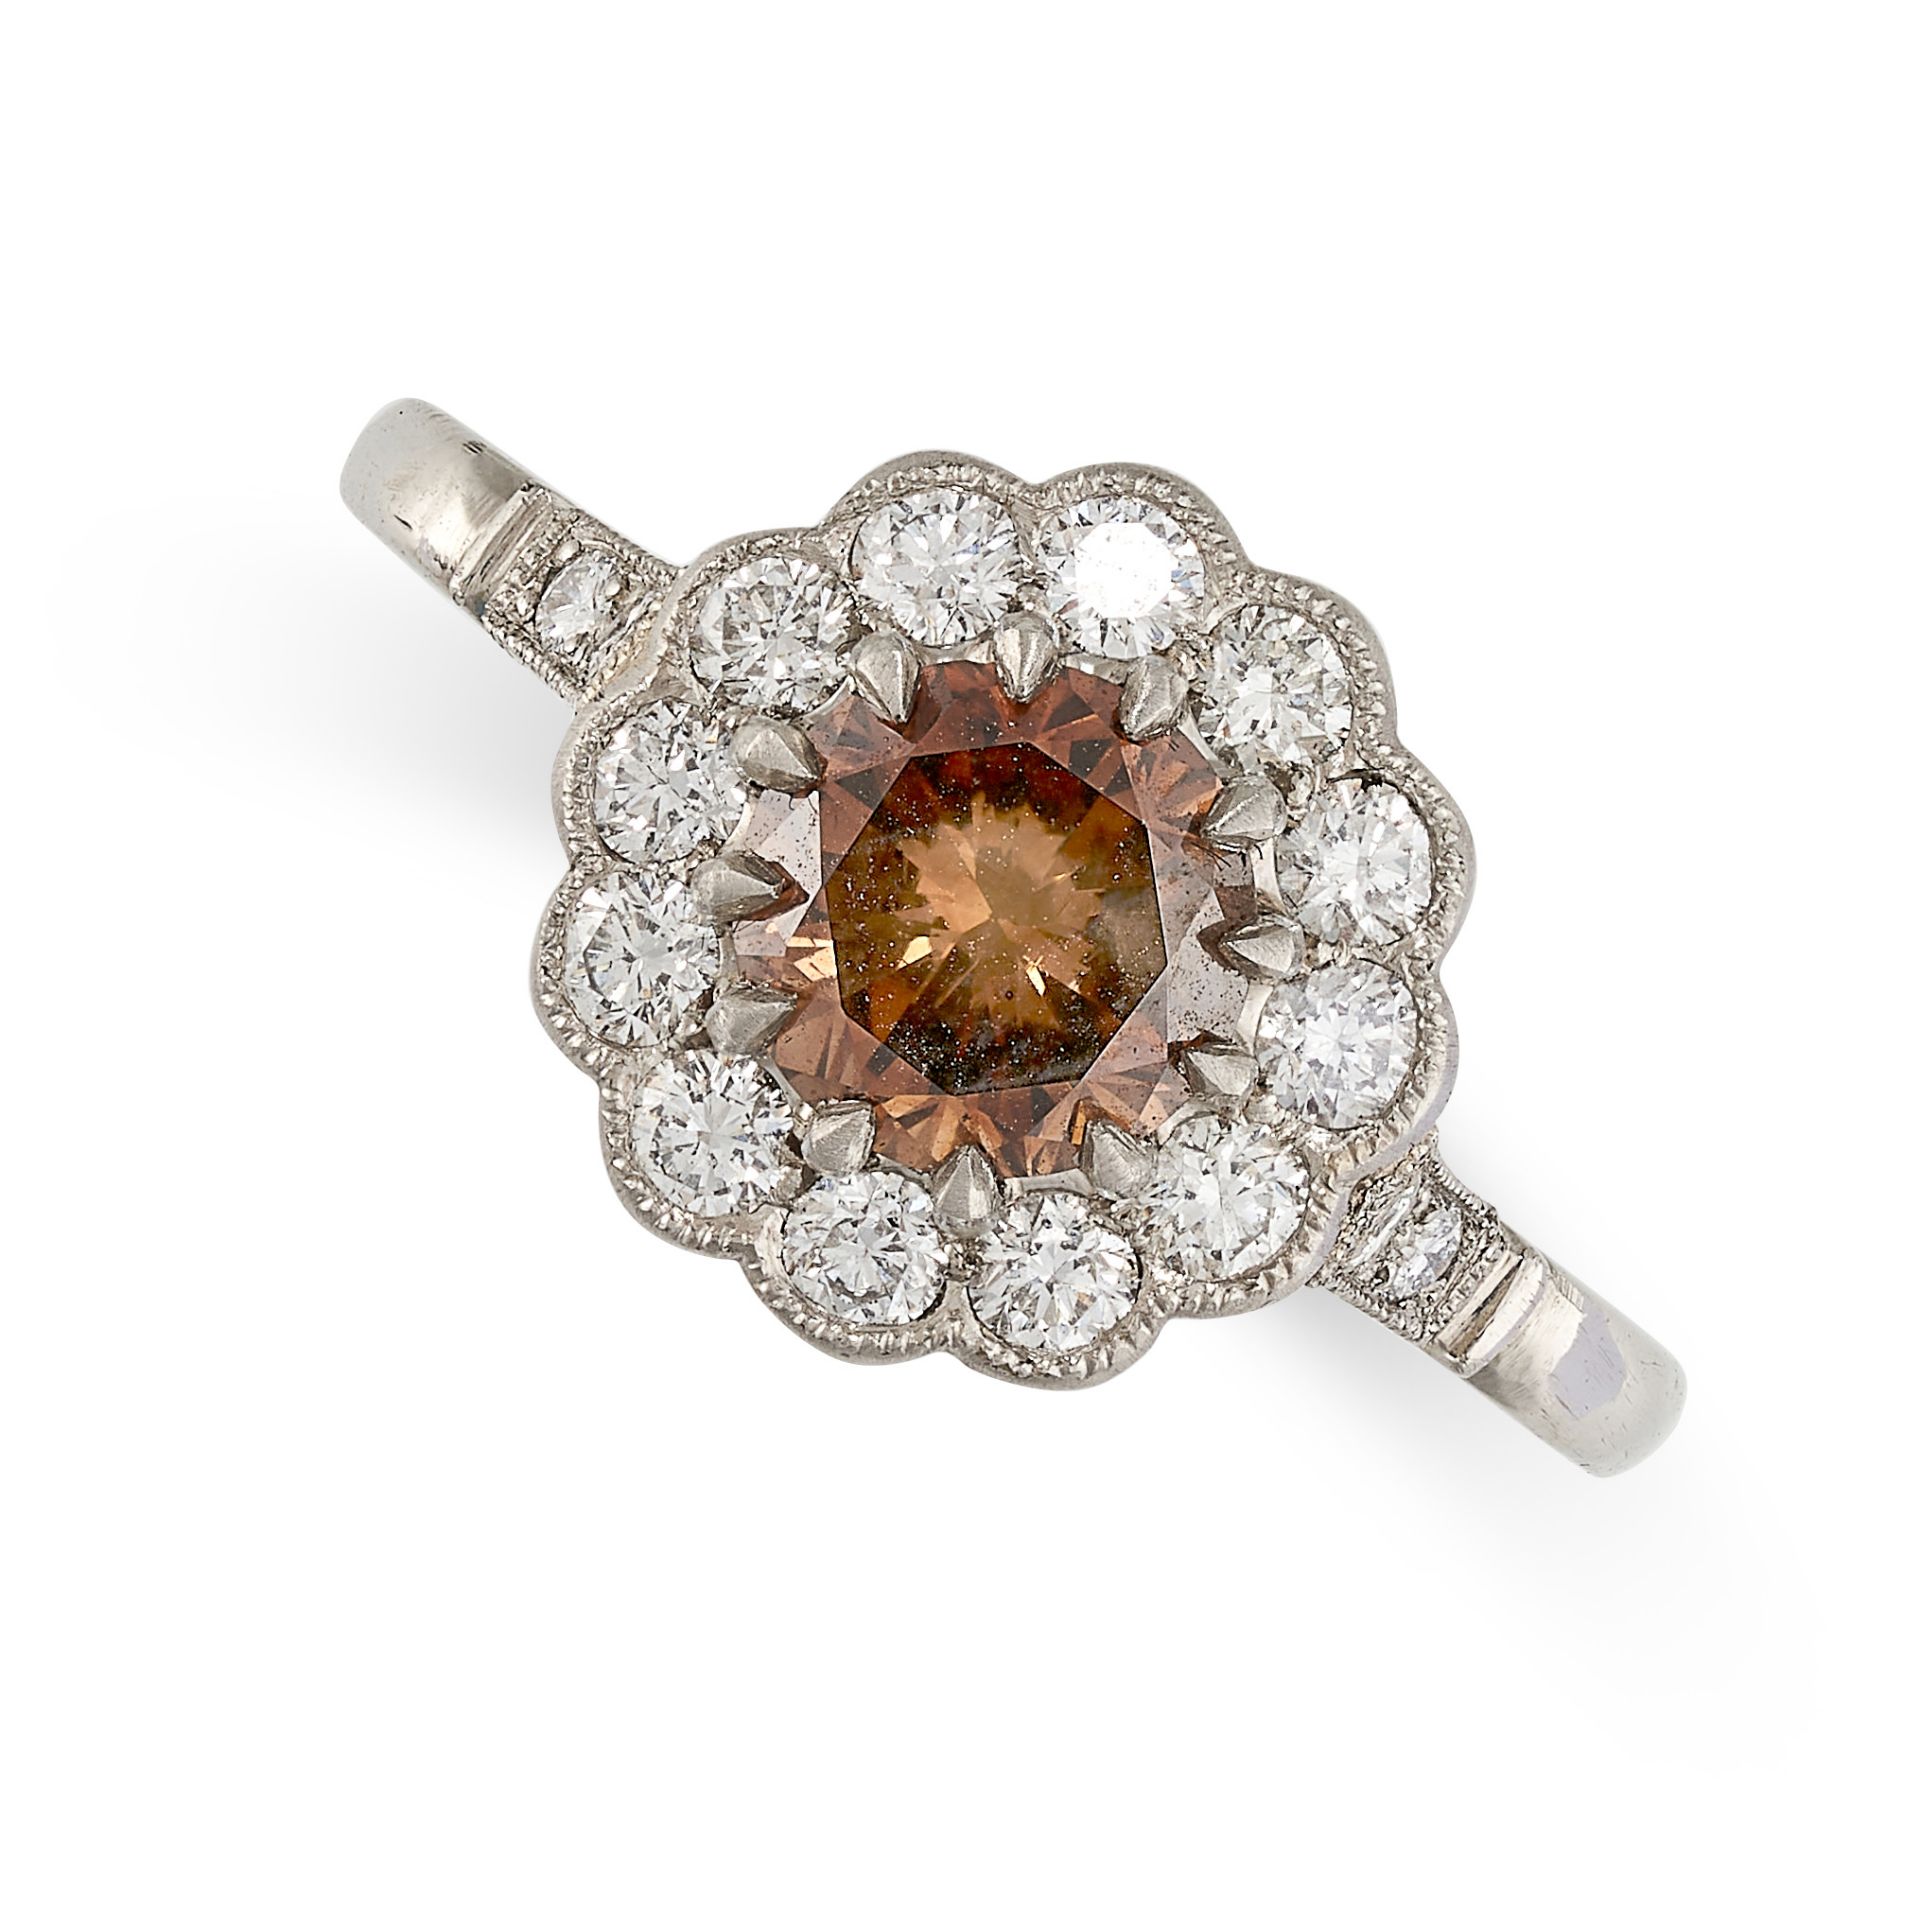 A FANCY COLOURED DIAMOND AND WHITE DIAMOND CLUSTER RING set with a round cut brown diamond of 1.01